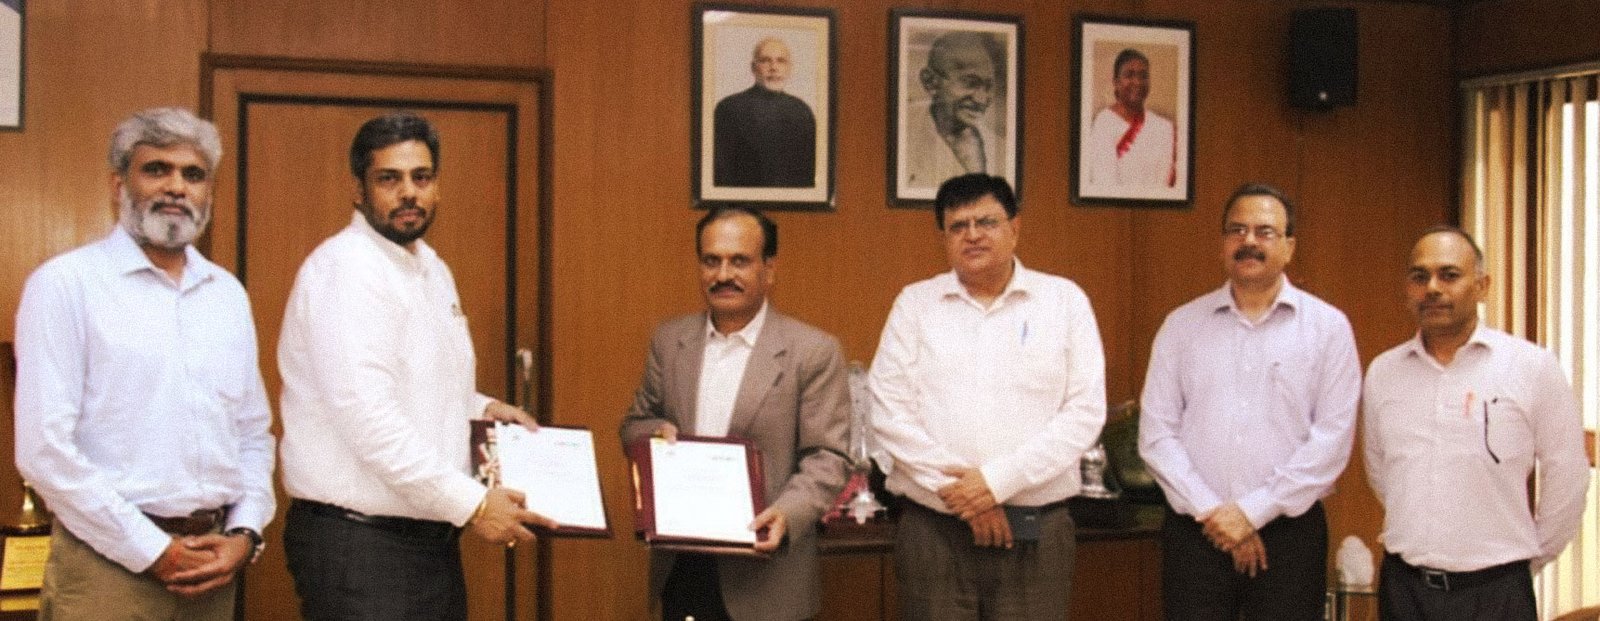 NSIC has signed MoU with UP Industrial Consultants Ltd.